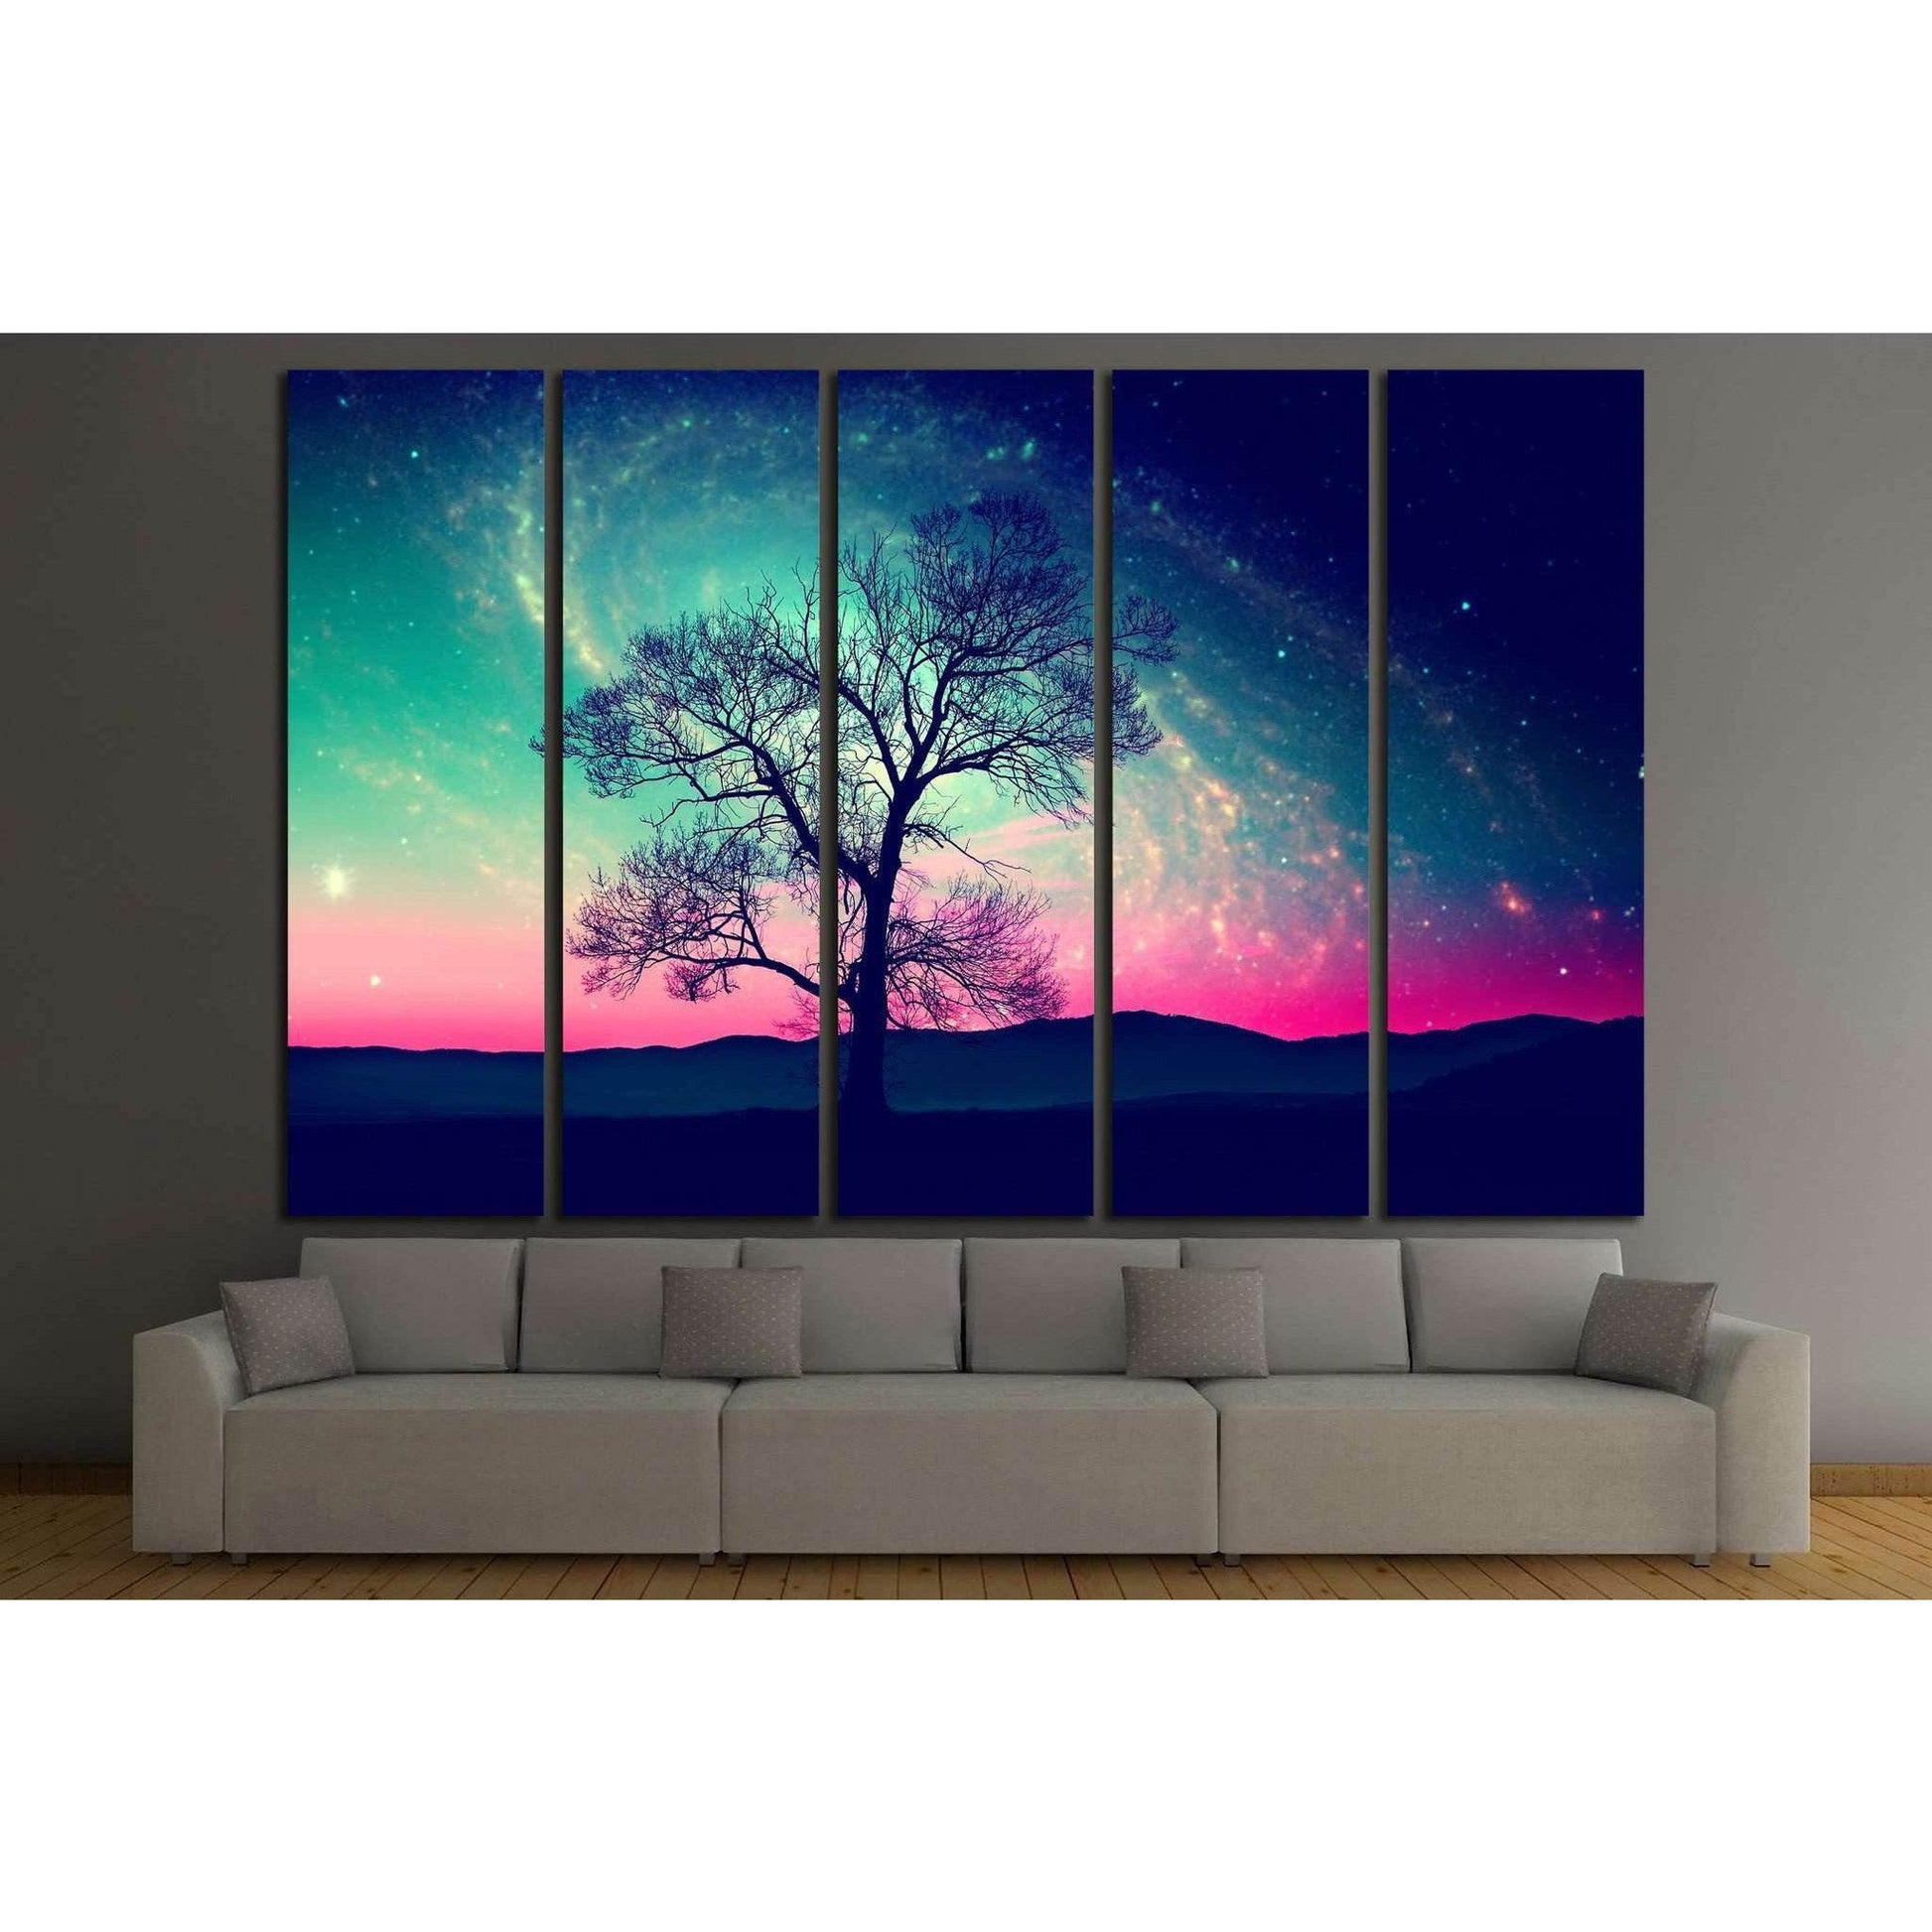 Cosmic Twilight Silhouette Canvas Print for Stellar Home DecorThis canvas print captures the ethereal beauty of a cosmic twilight with a lone tree silhouetted against a star-studded sky. The fusion of celestial wonder and earthly solitude makes it a profo